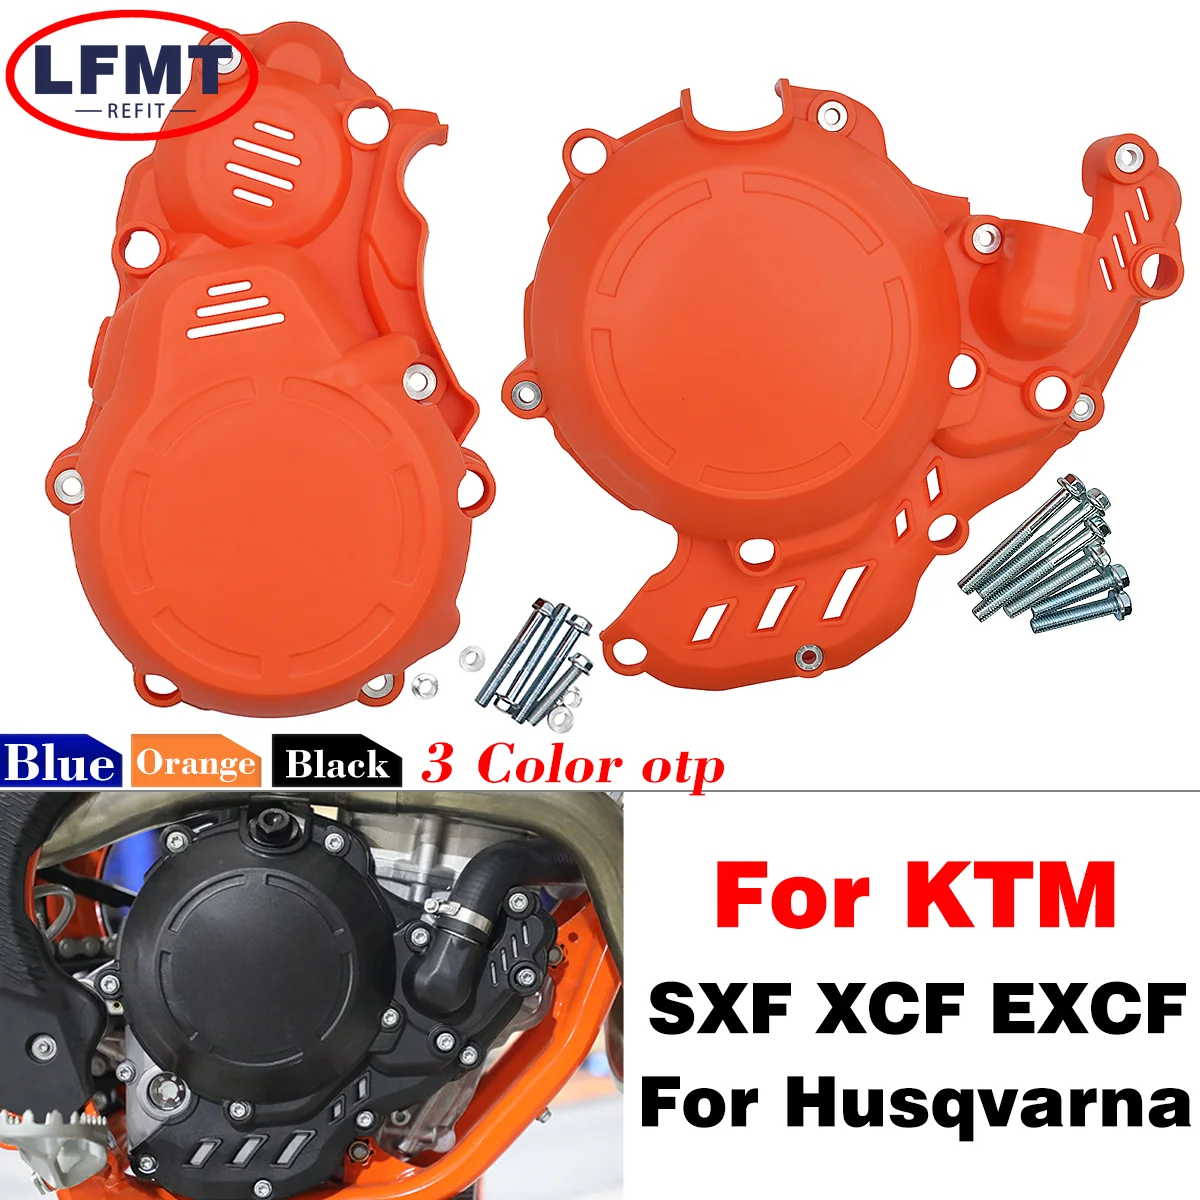 

For KTM EXCF SXF XCF XCFW 250 350 FREERIDE 4T EXC-F SX-F XC-F XCF-W Motorcycle Ignition Clutch Cover Guard Protector 2016-2023